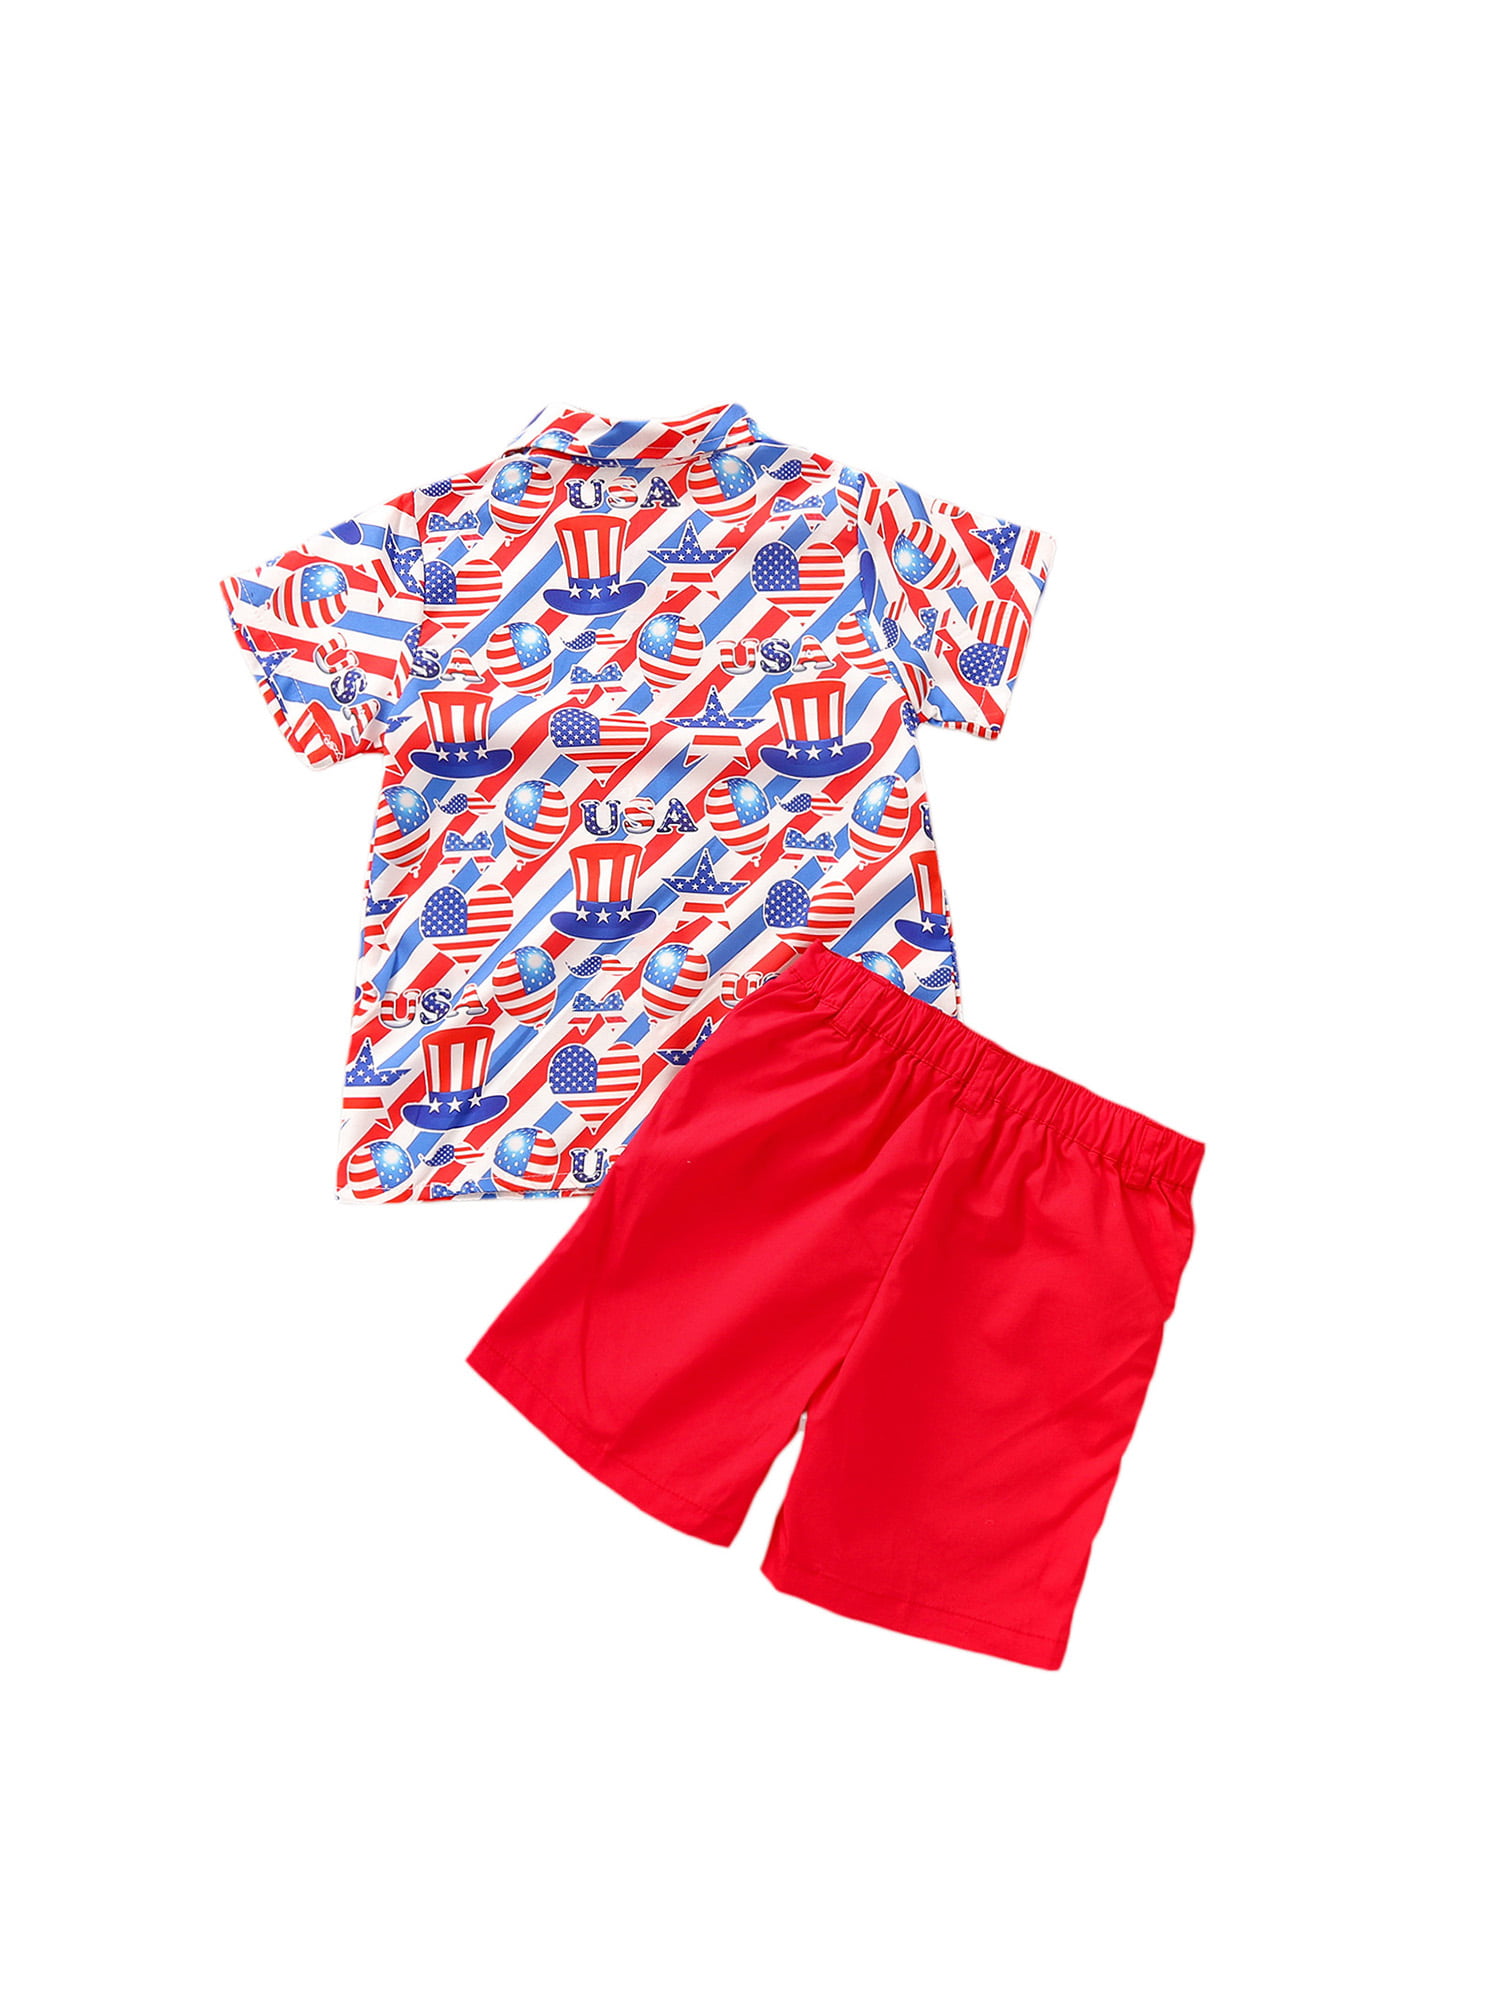 2pcs Toddler Baby Boys summer top Tee+short Pants Outfits Clothes Set star 